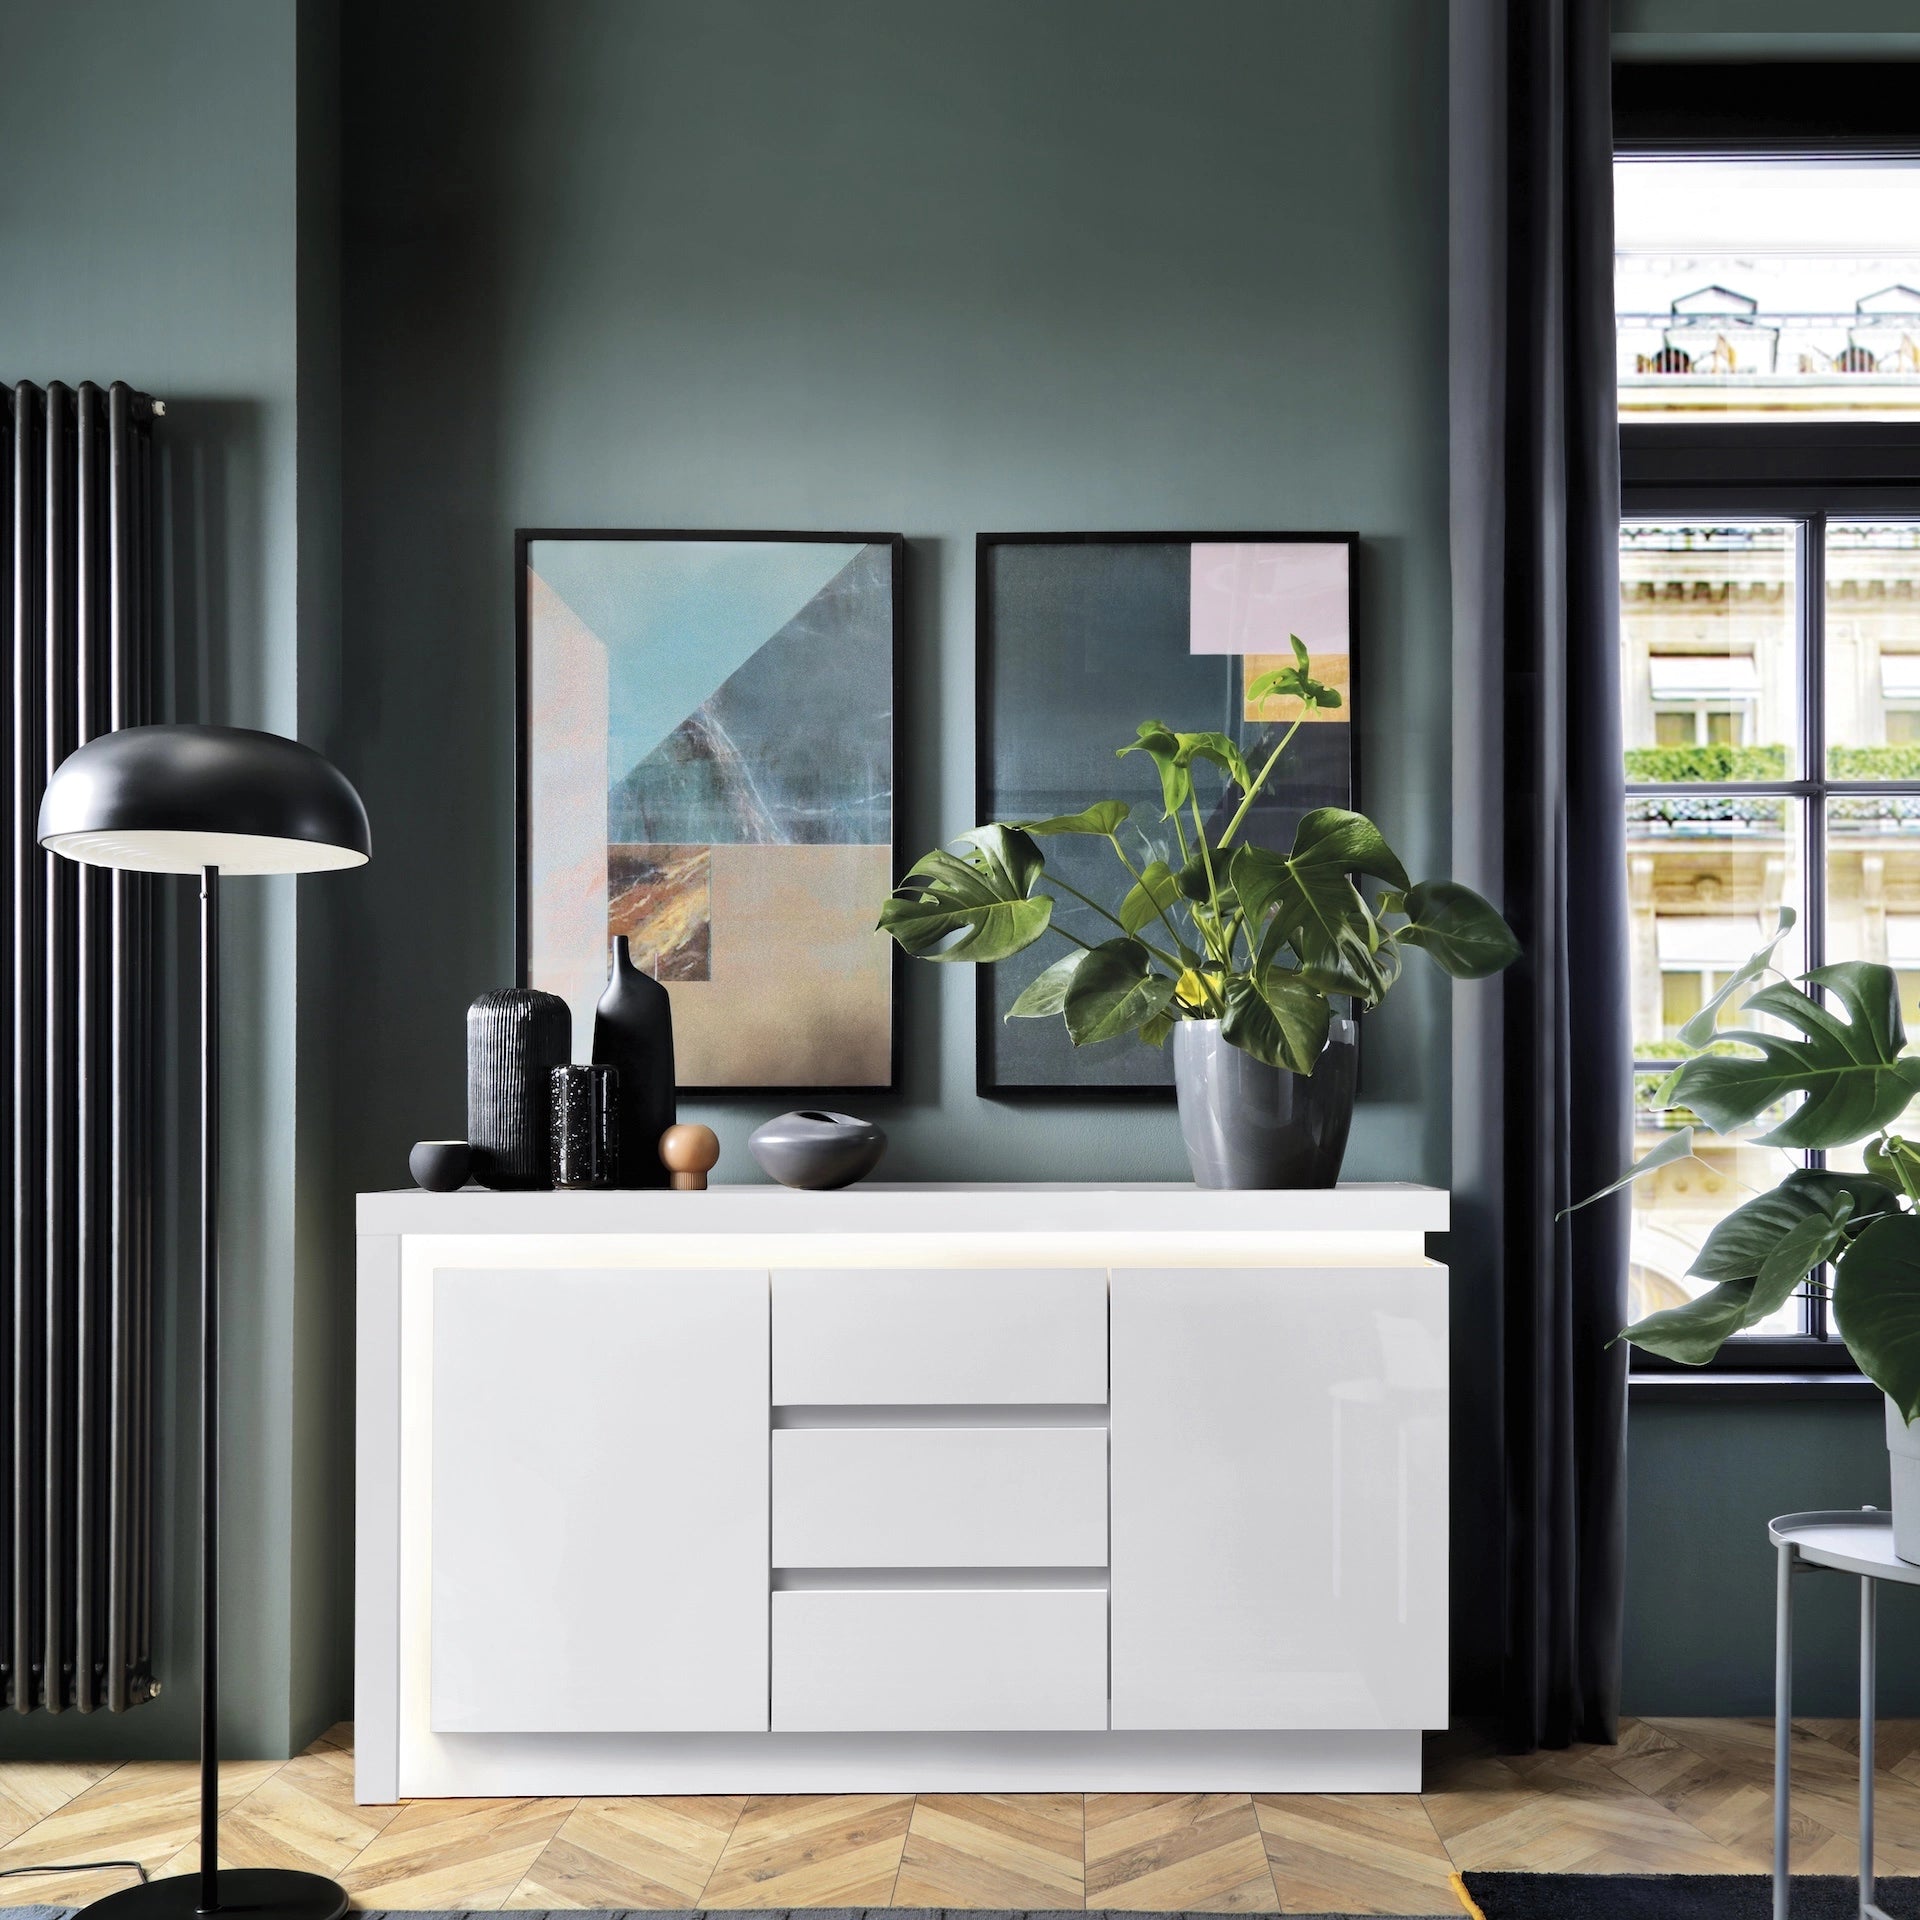 Furniture To Go Lyon 2 Door 3 Drawer Sideboard (Including Led Lighting) in White & High Gloss